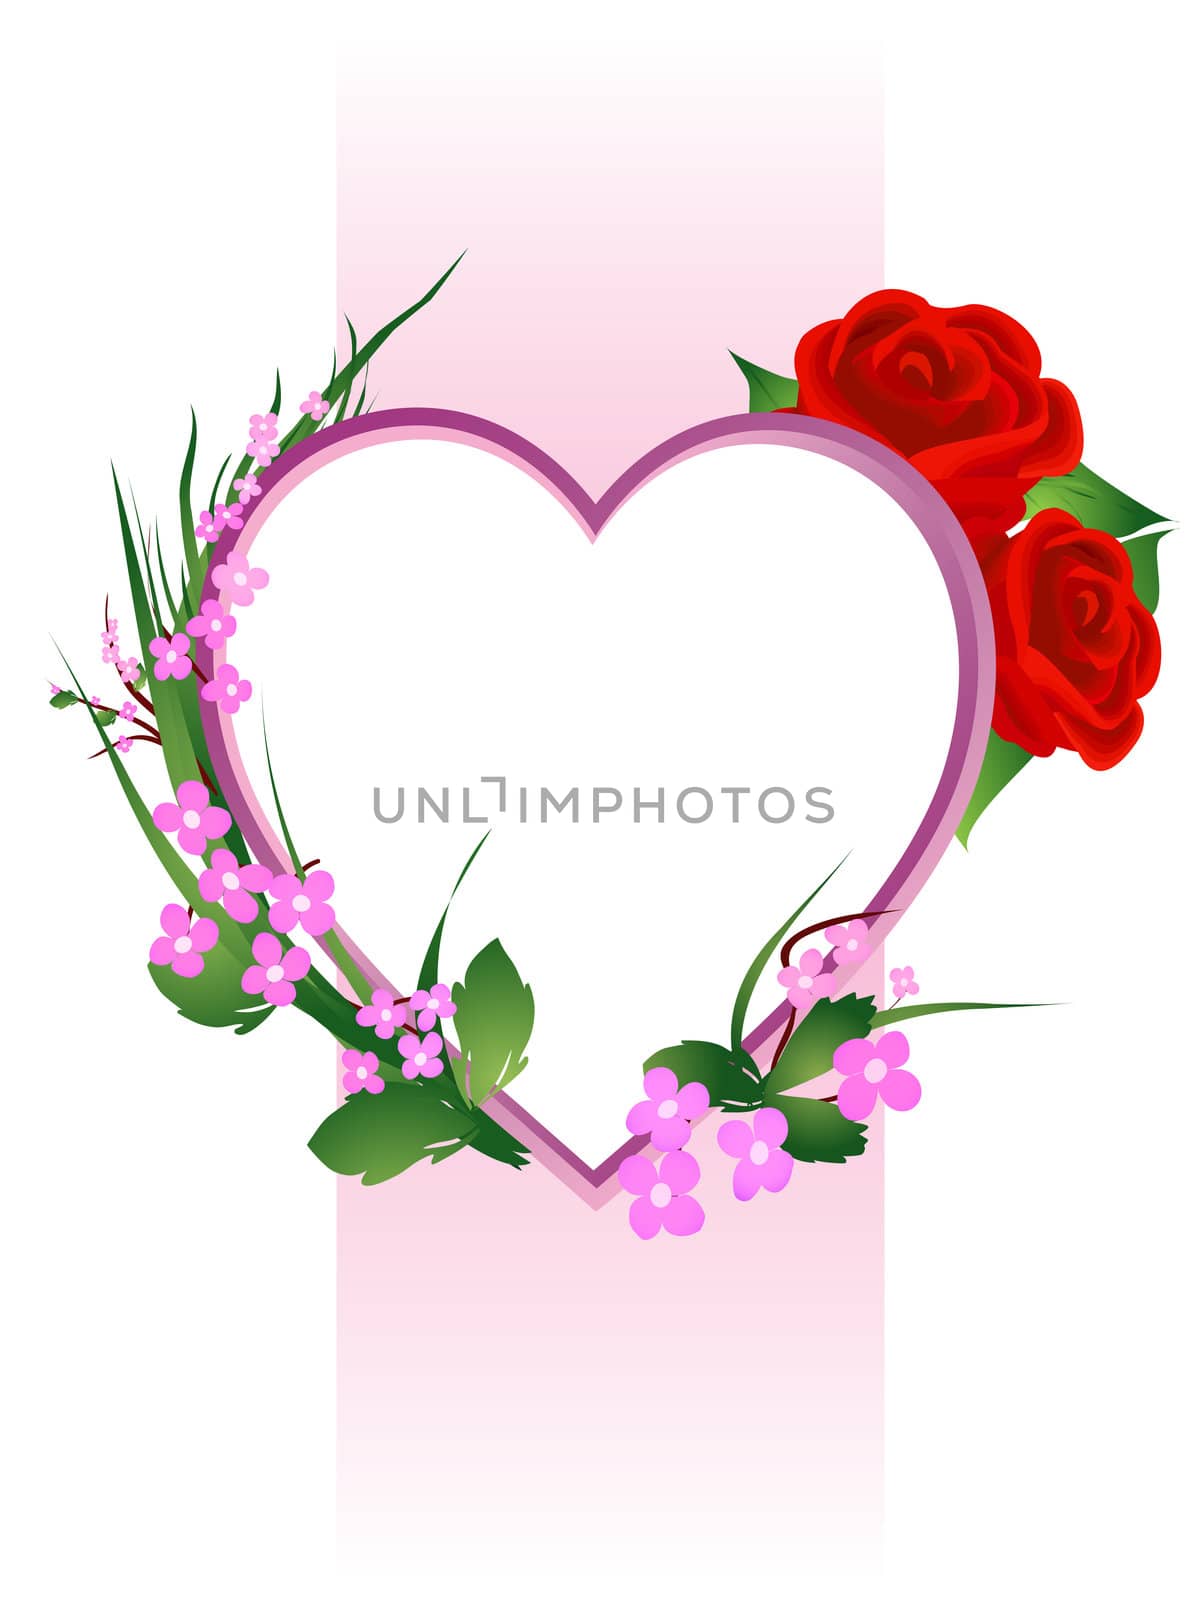 Valentines Day floral composition, isolated objects over white